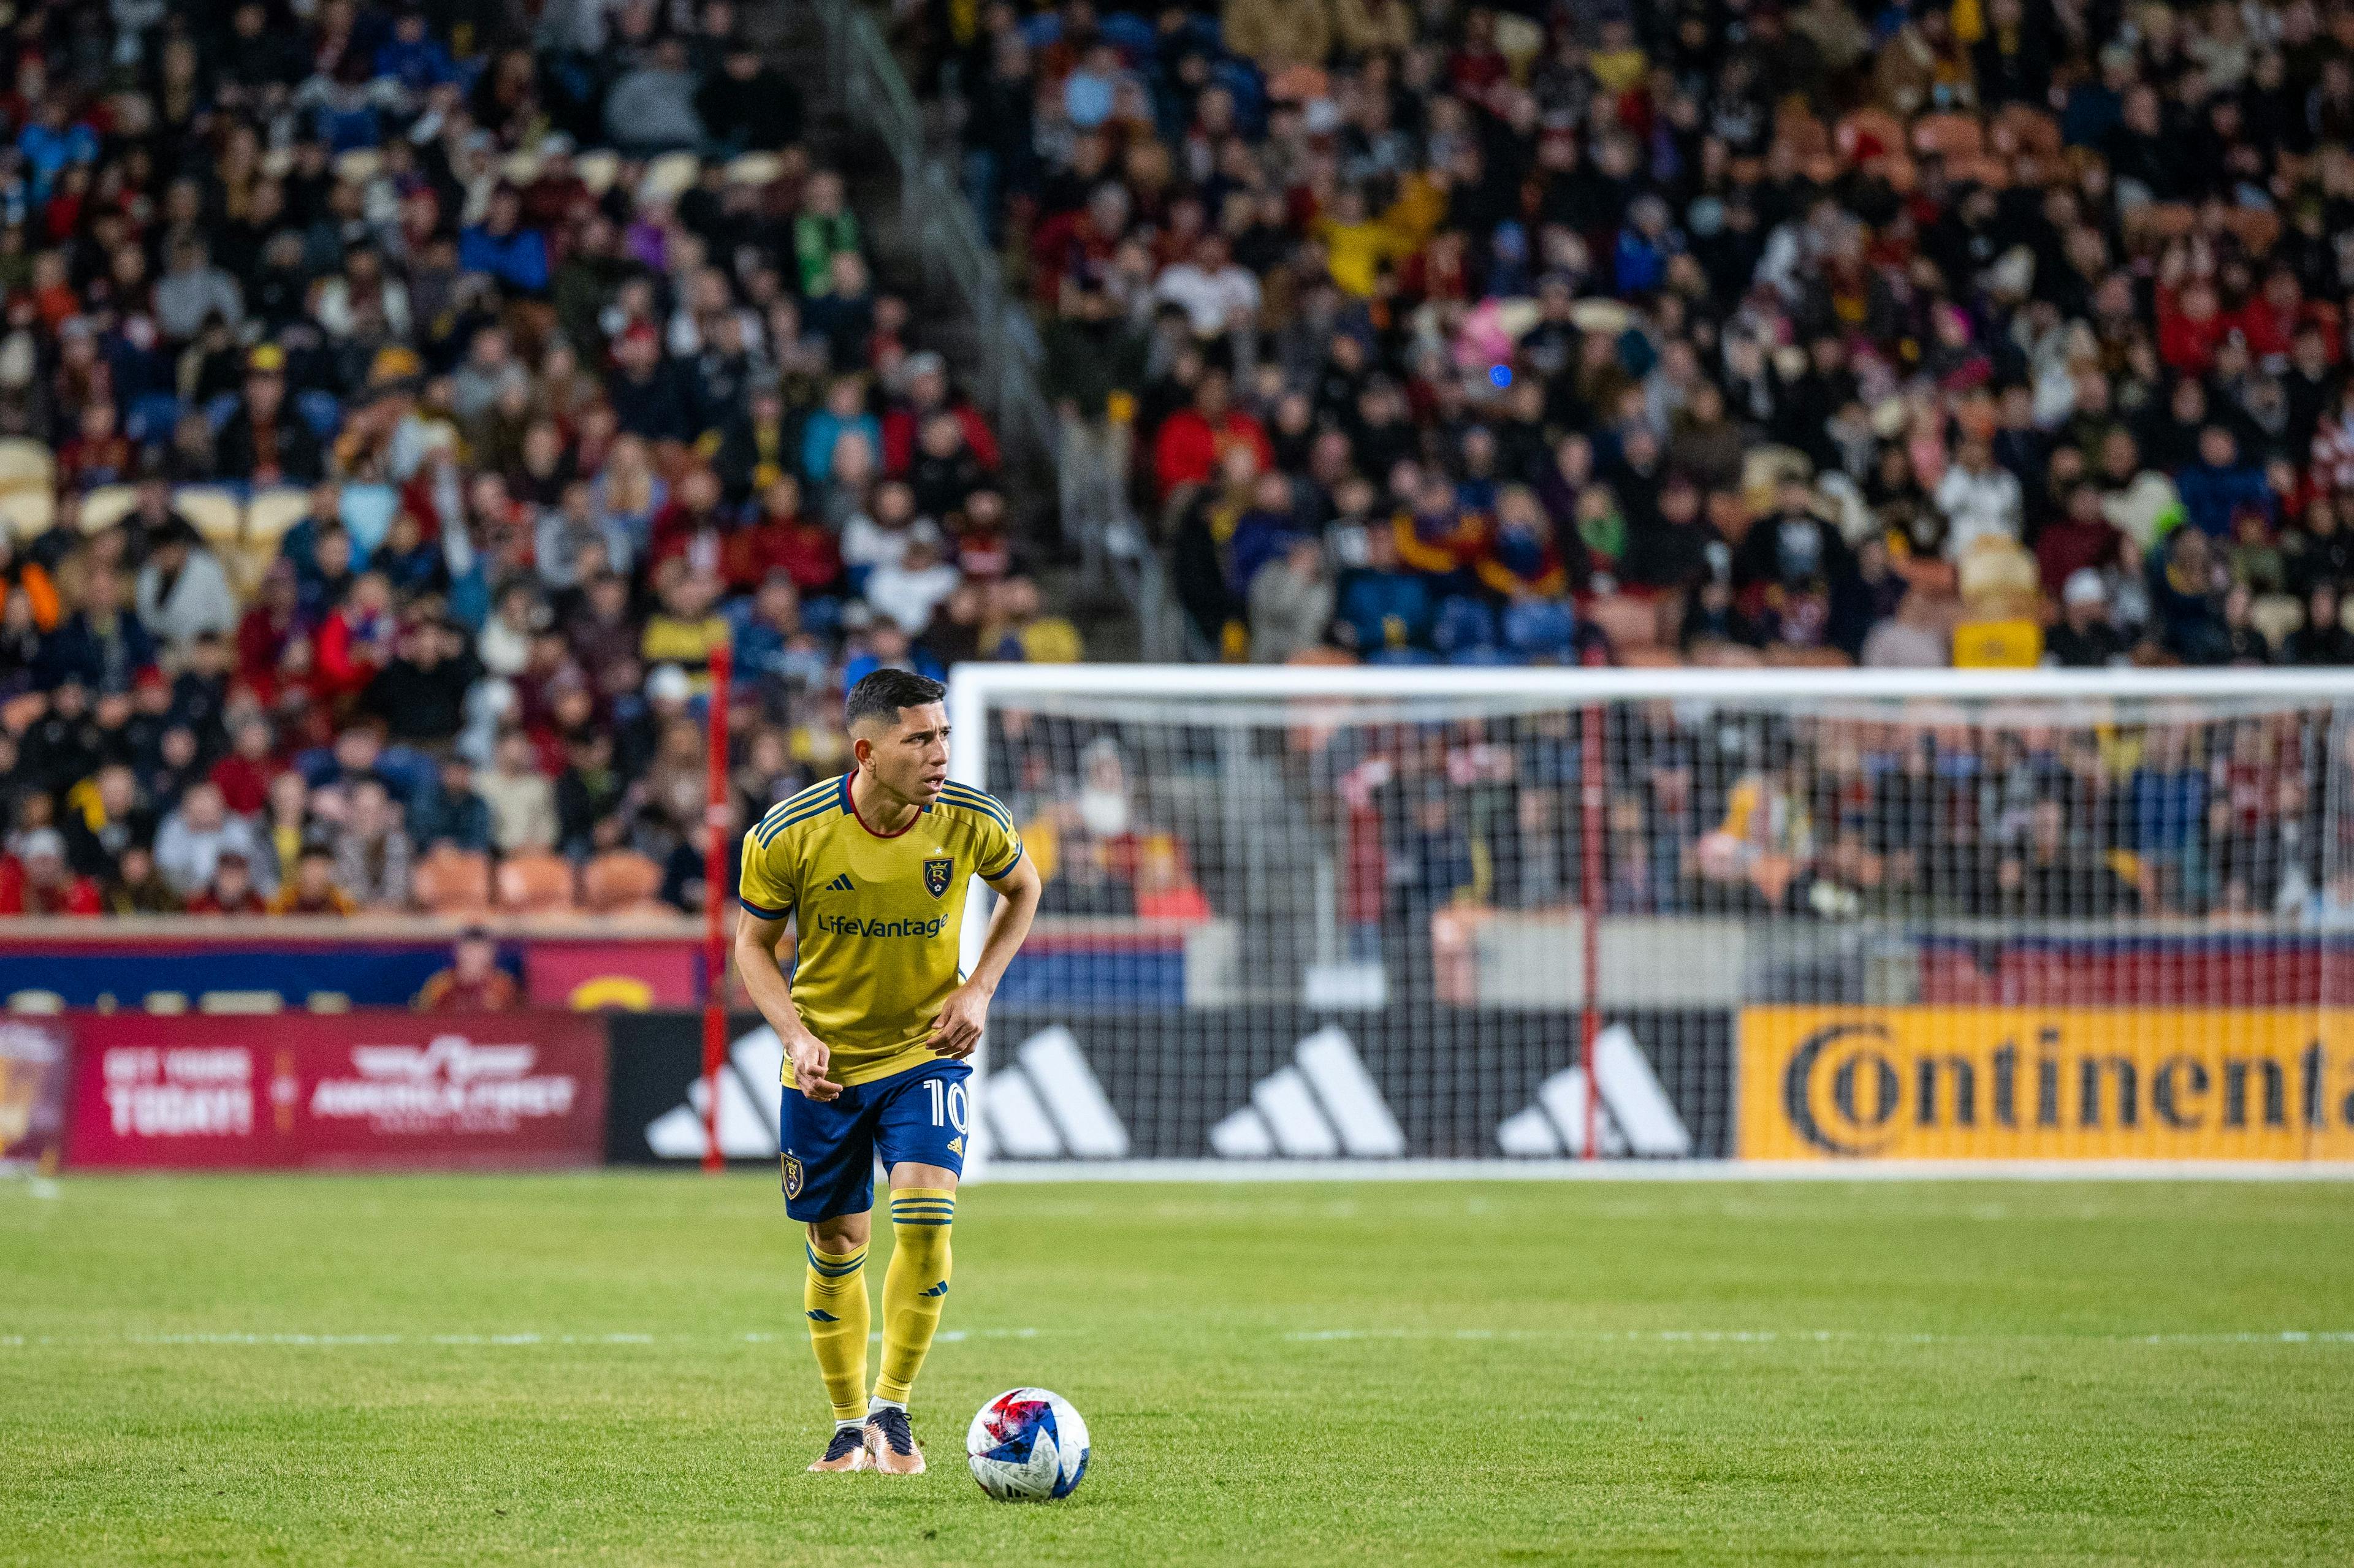 Real Salt Lake vs. FC Dallas: Player of the match